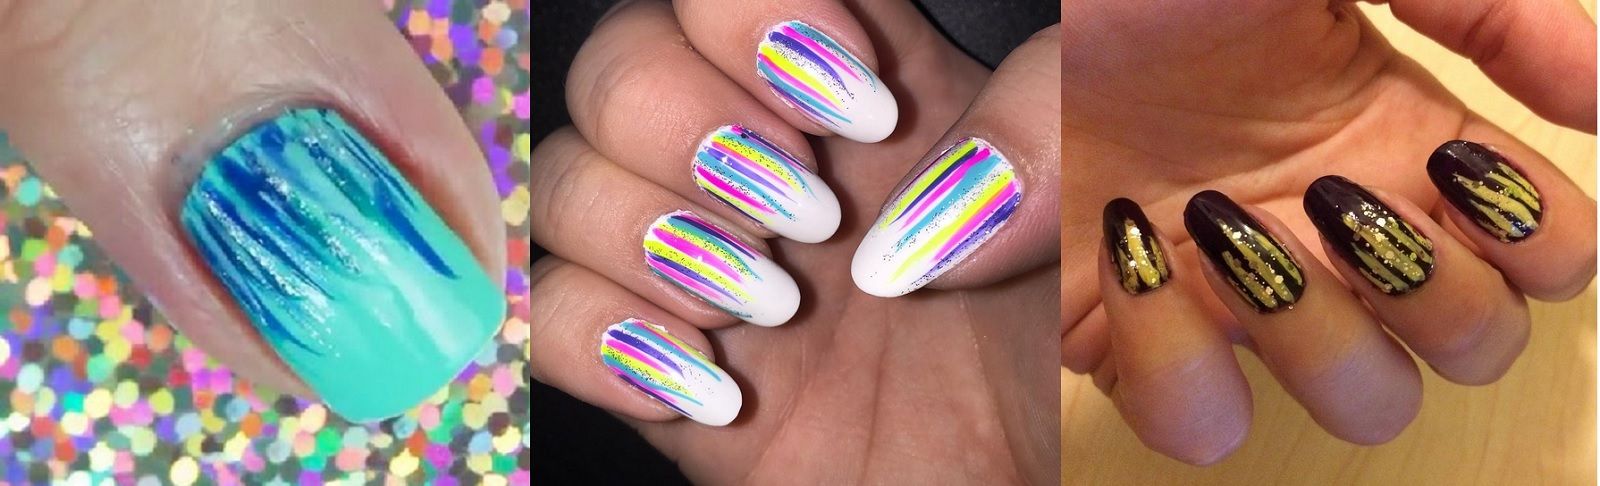 Nail Art: cascate sulle unghie con la Waterfall Nails